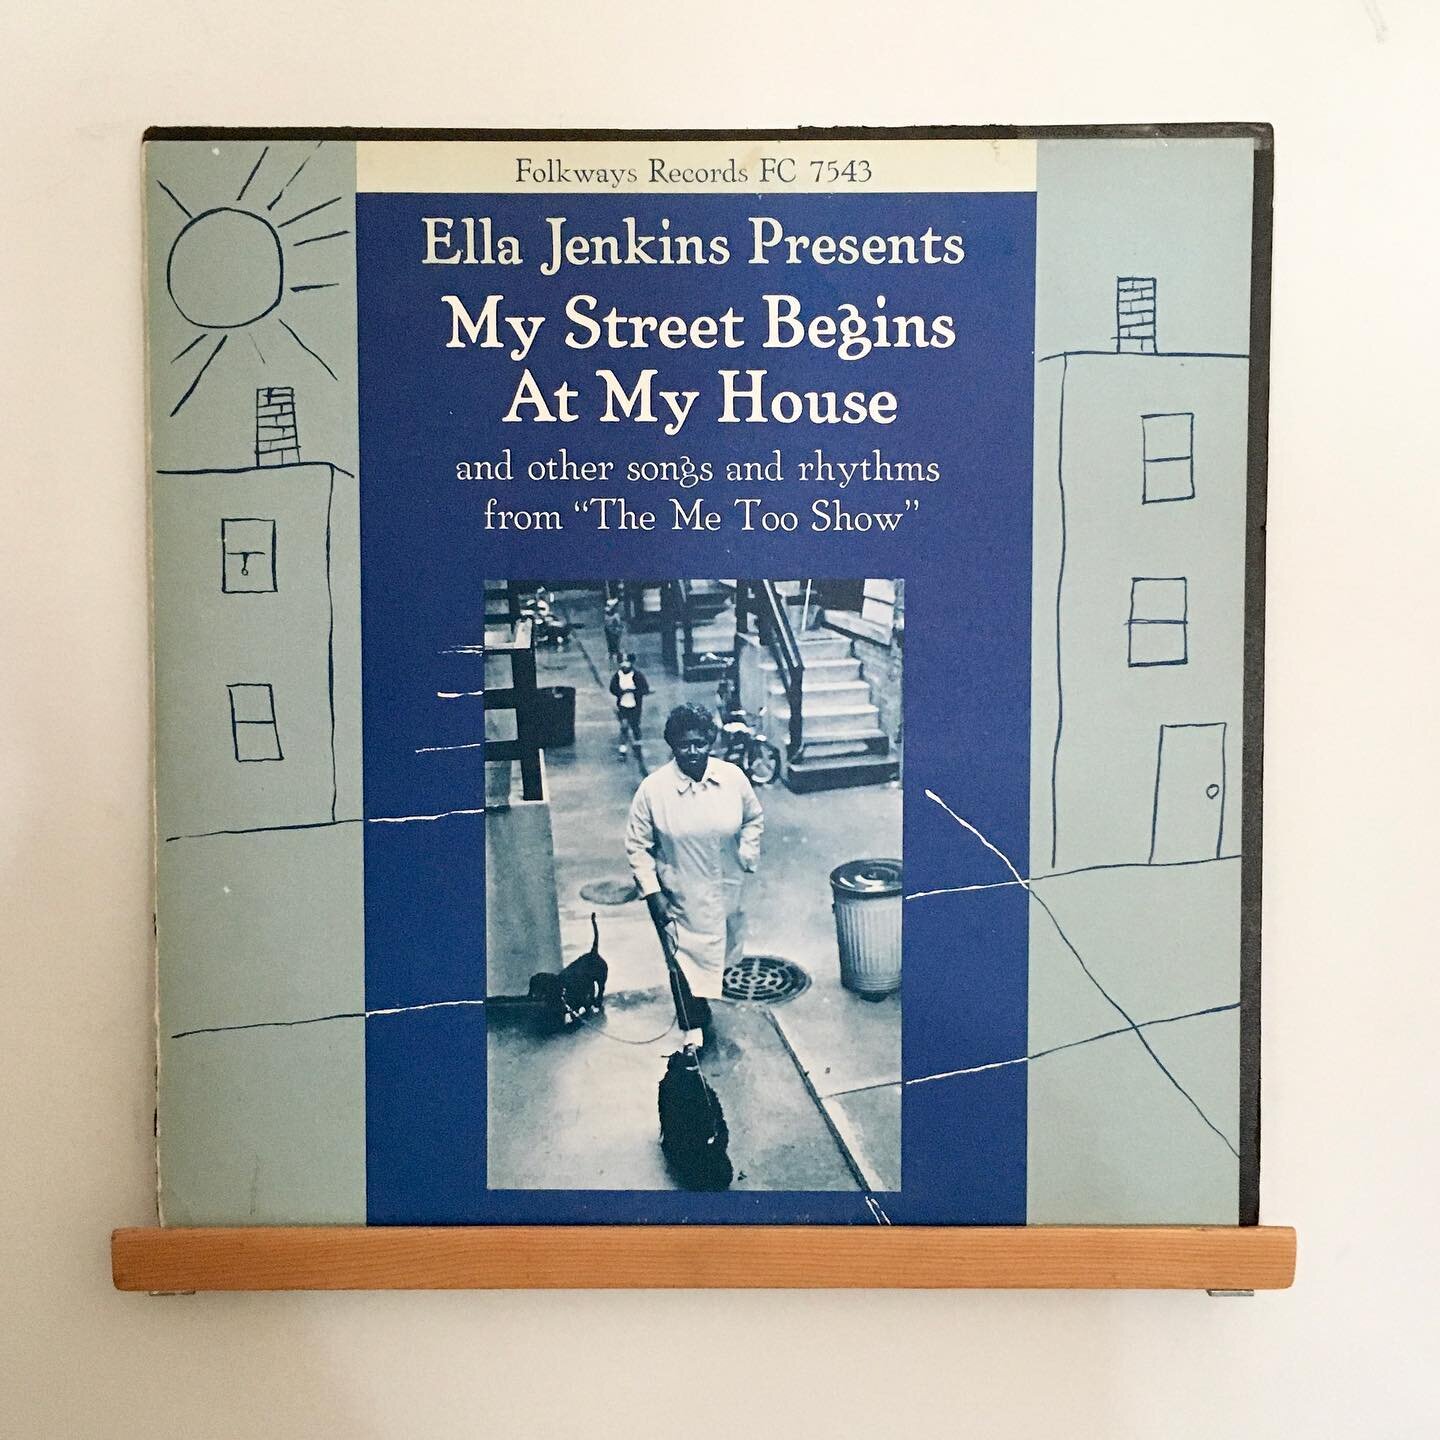 My most recent set of prints is called &ldquo;My Street Begins at My House&rdquo; after the classic album by folk musician and educator Ella Jenkins. In the album she invites children to draw their own town. I got to visit with an awesome group of 5t